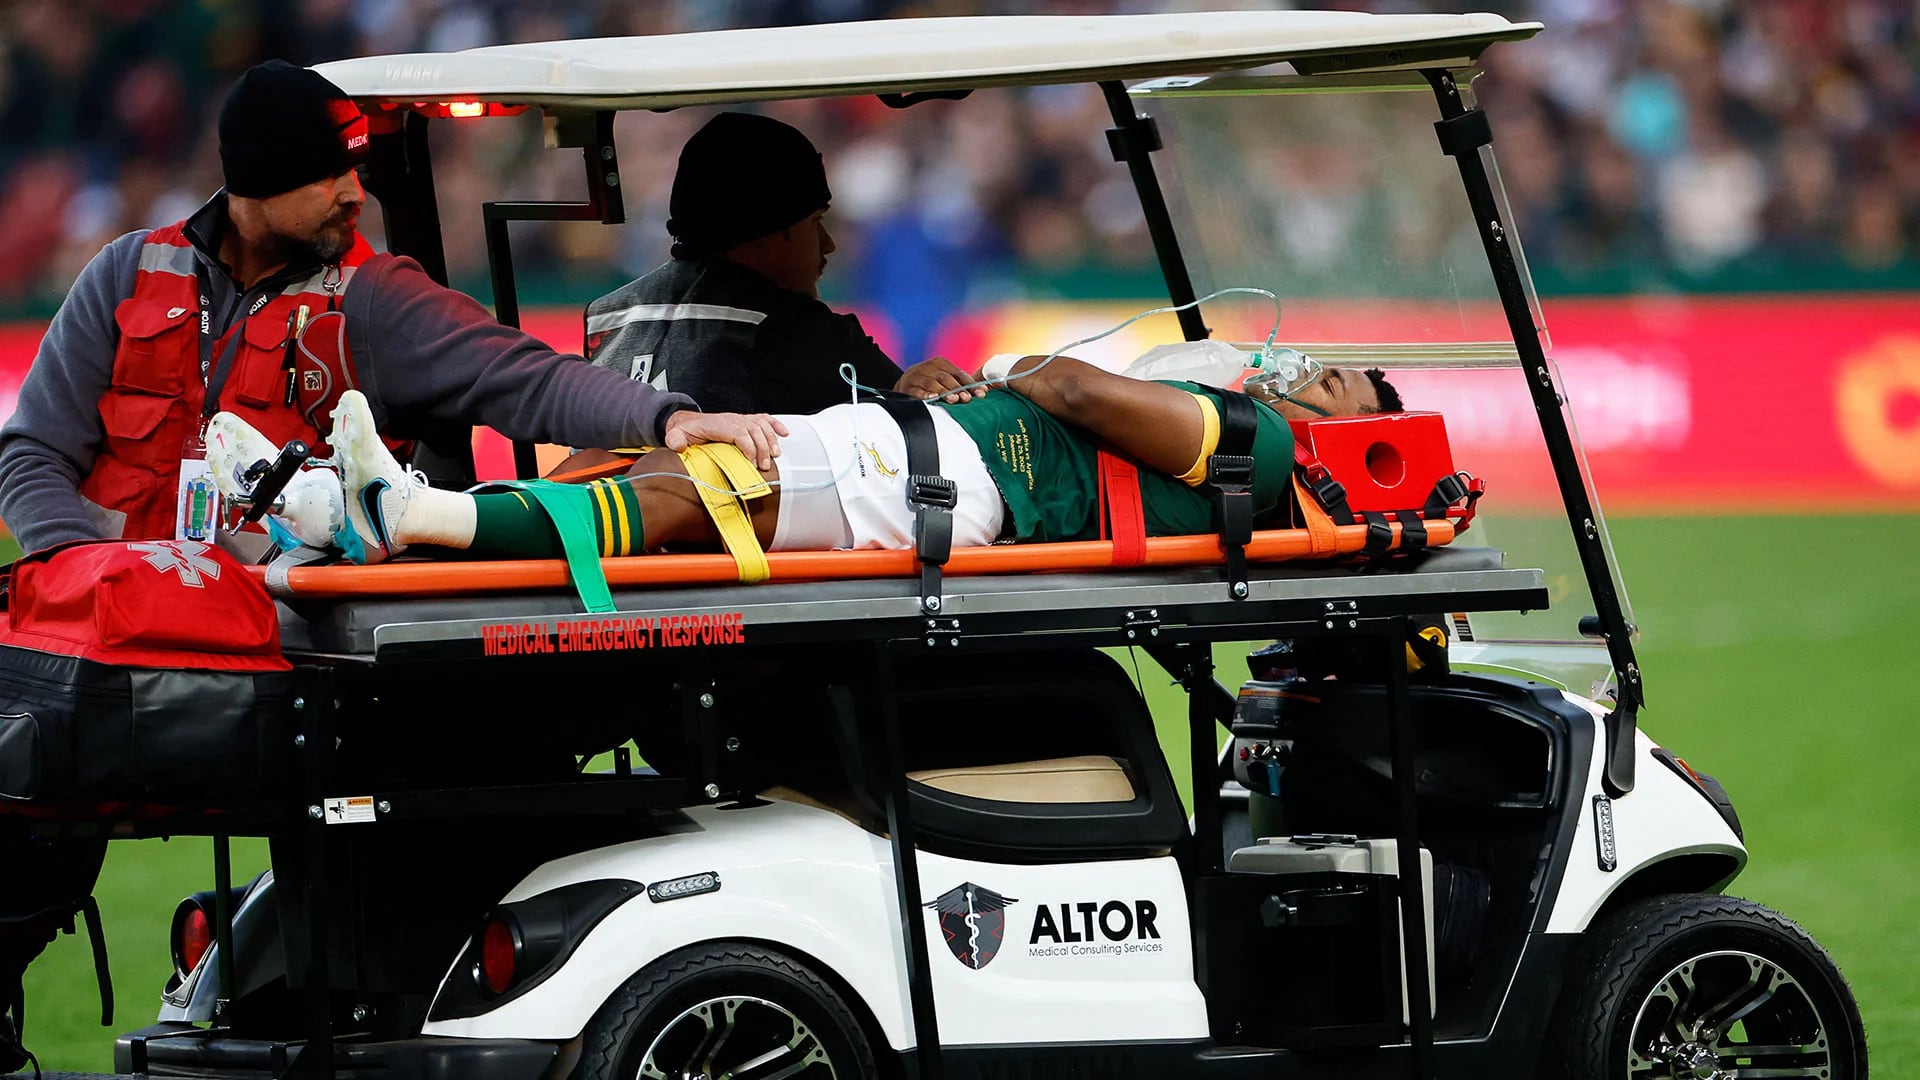 South Africa's scrumhalf Grant Williams (C) is evacuated by medical personnel on a stretcher placed on a vehicle after being injured during the Rugby Championship final-round match between South Africa and Argentina at Ellis Park in Johannesburg on July 29, 2023. (Photo by WIKUS DE WET / AFP)